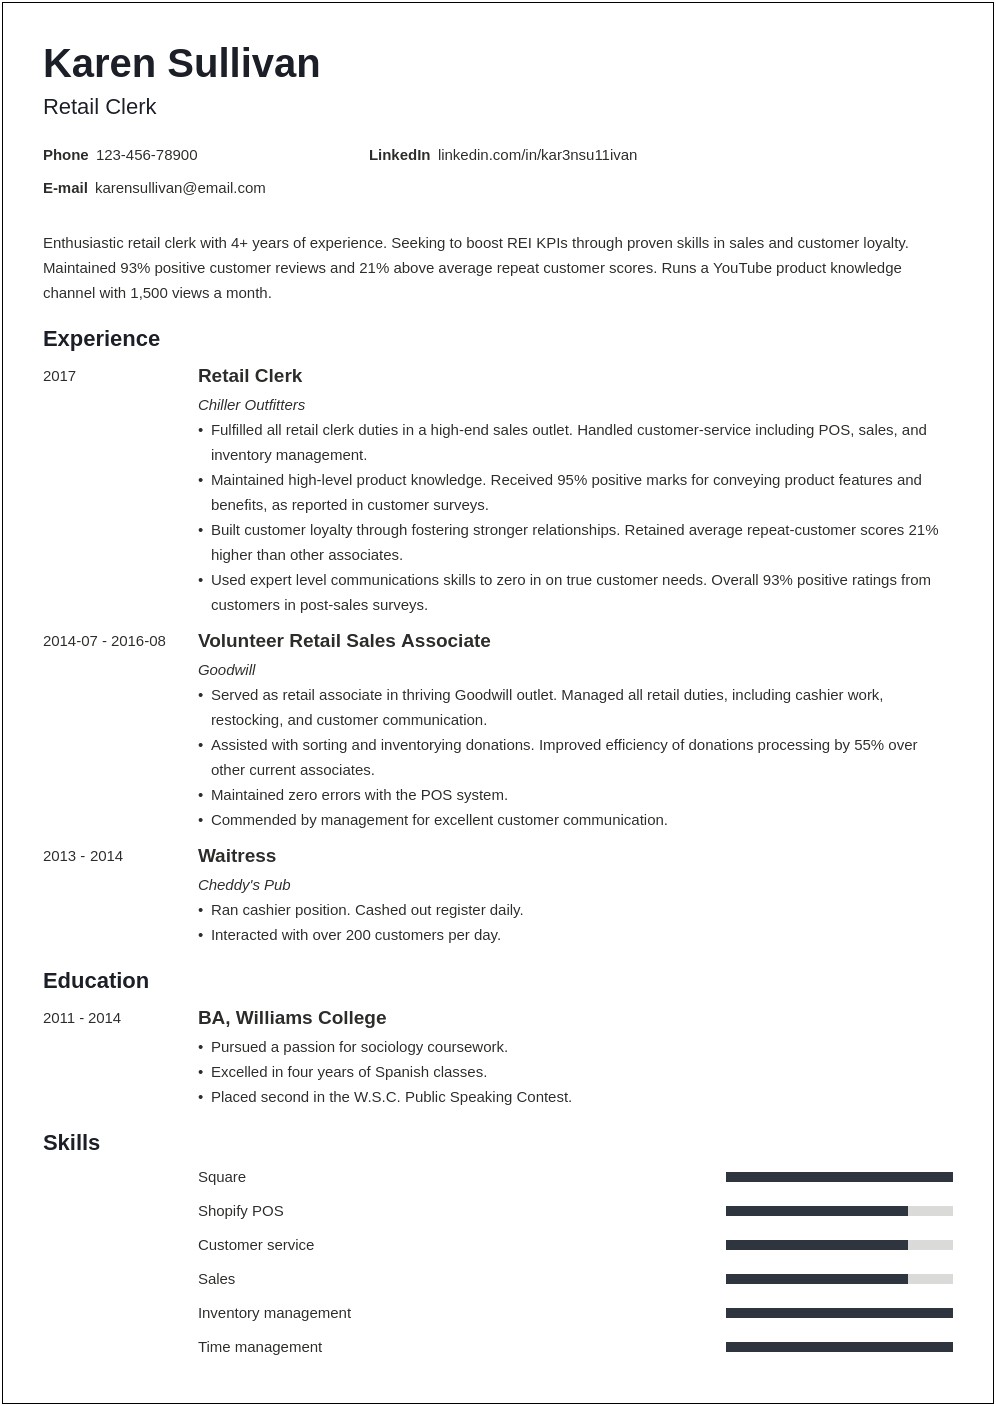 Sample Resume For Entry Level Retail Position